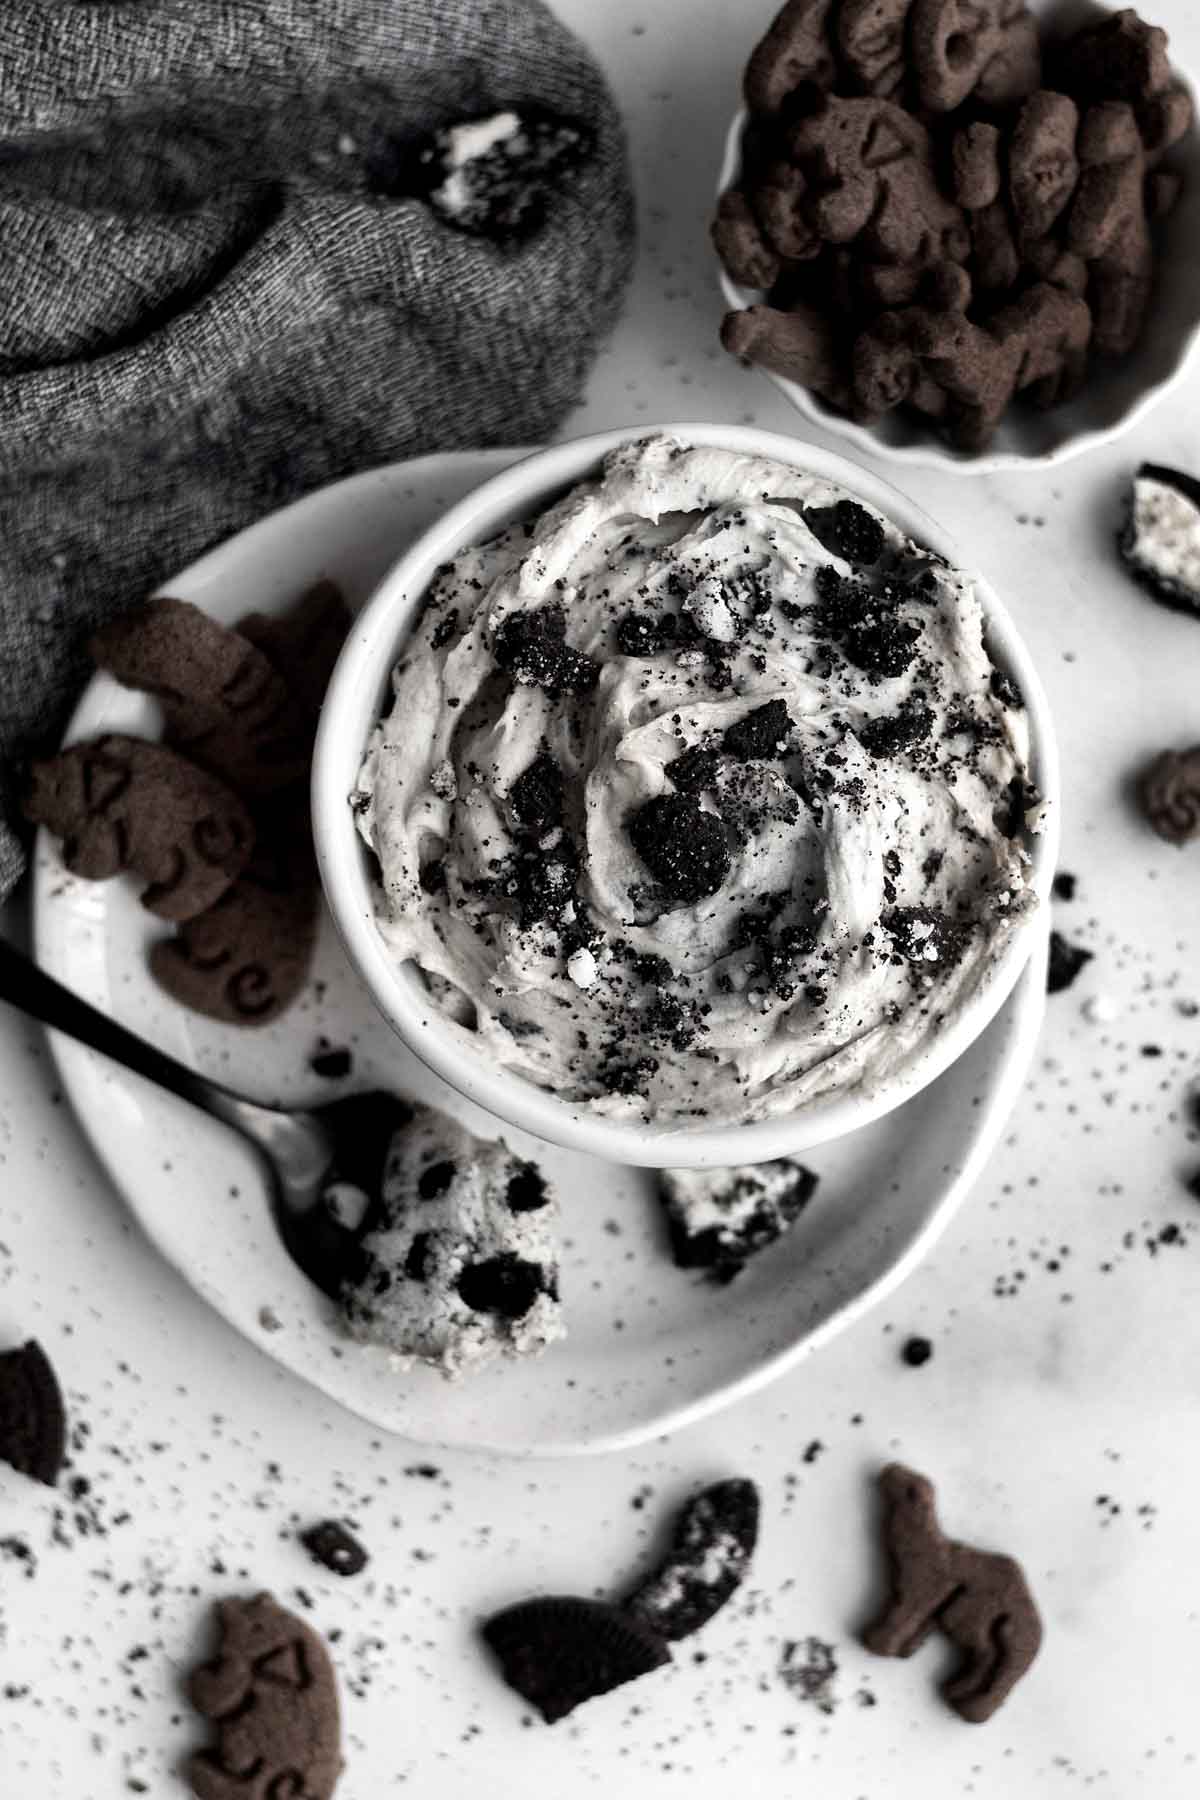 Looking down at the swirl of Oreo Dip.